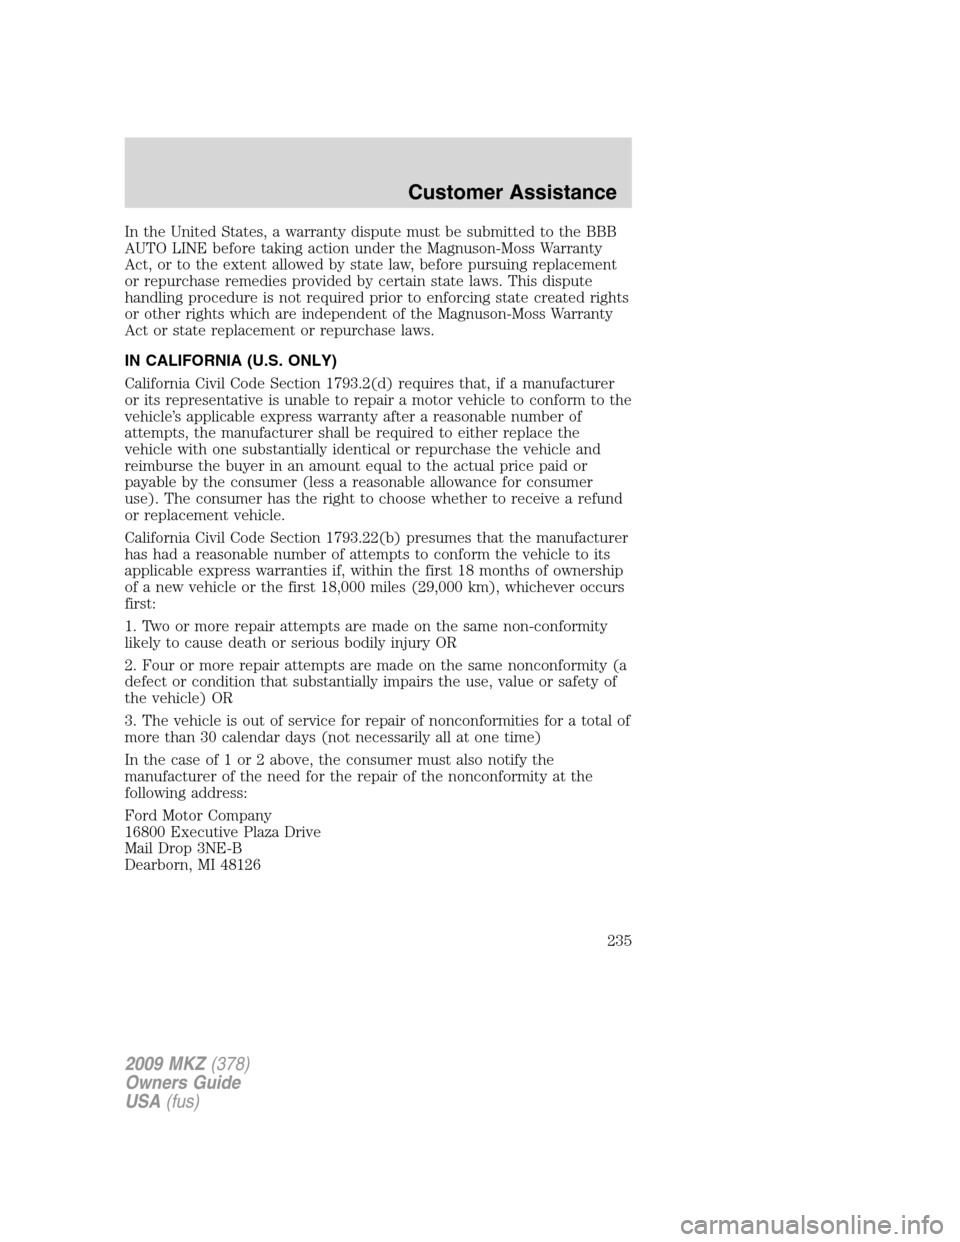 LINCOLN MKZ 2009 Service Manual In the United States, a warranty dispute must be submitted to the BBB
AUTO LINE before taking action under the Magnuson-Moss Warranty
Act, or to the extent allowed by state law, before pursuing replac